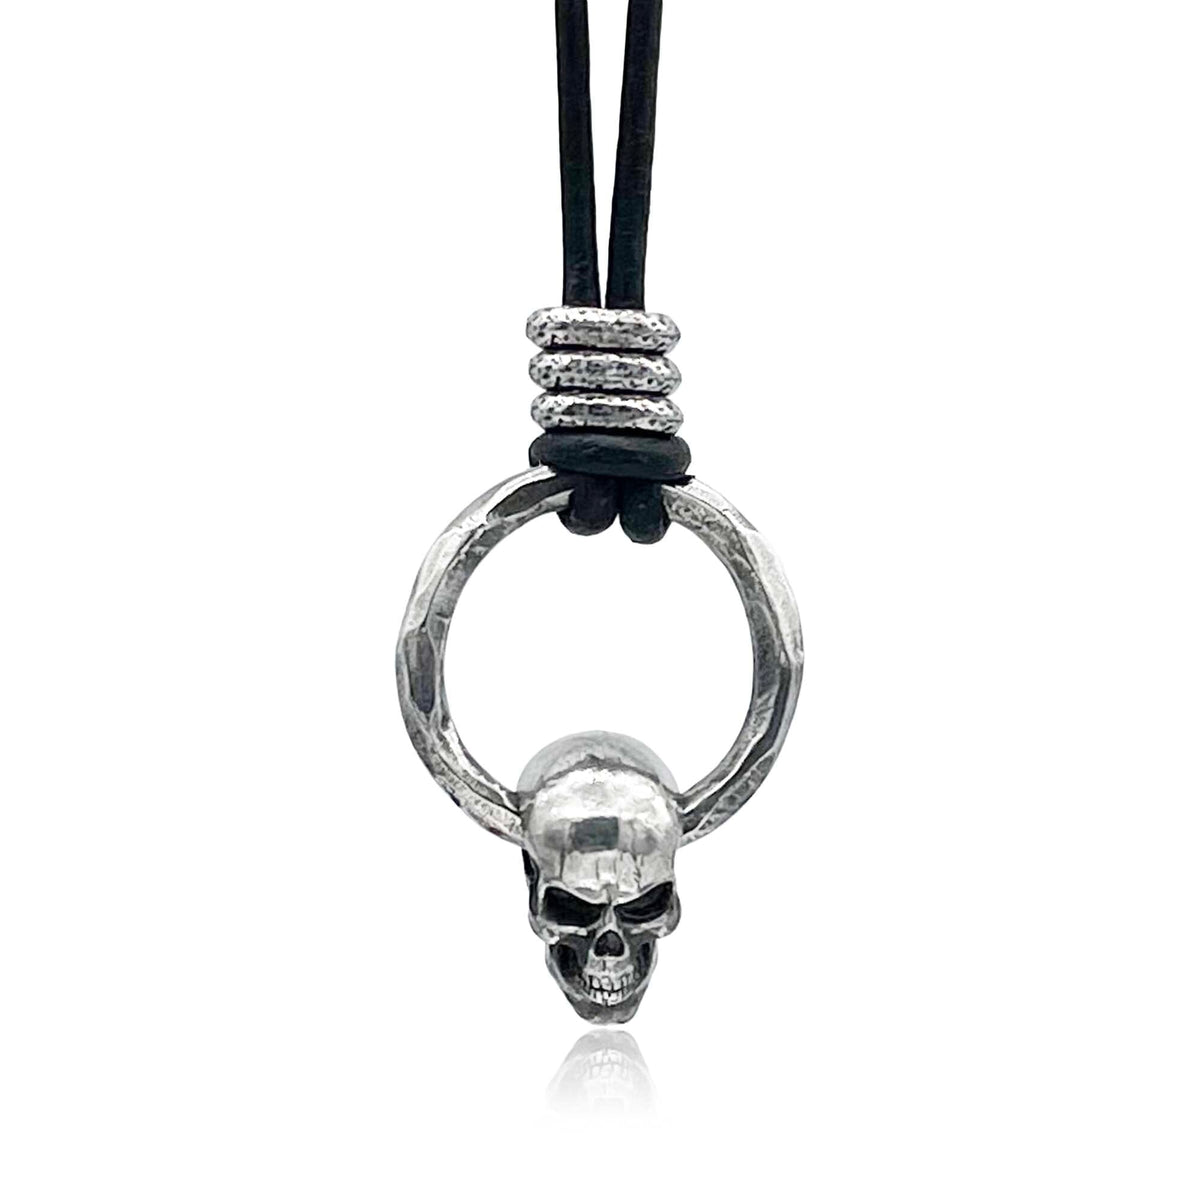 Spinning Skull and Hammered Ring Pendant